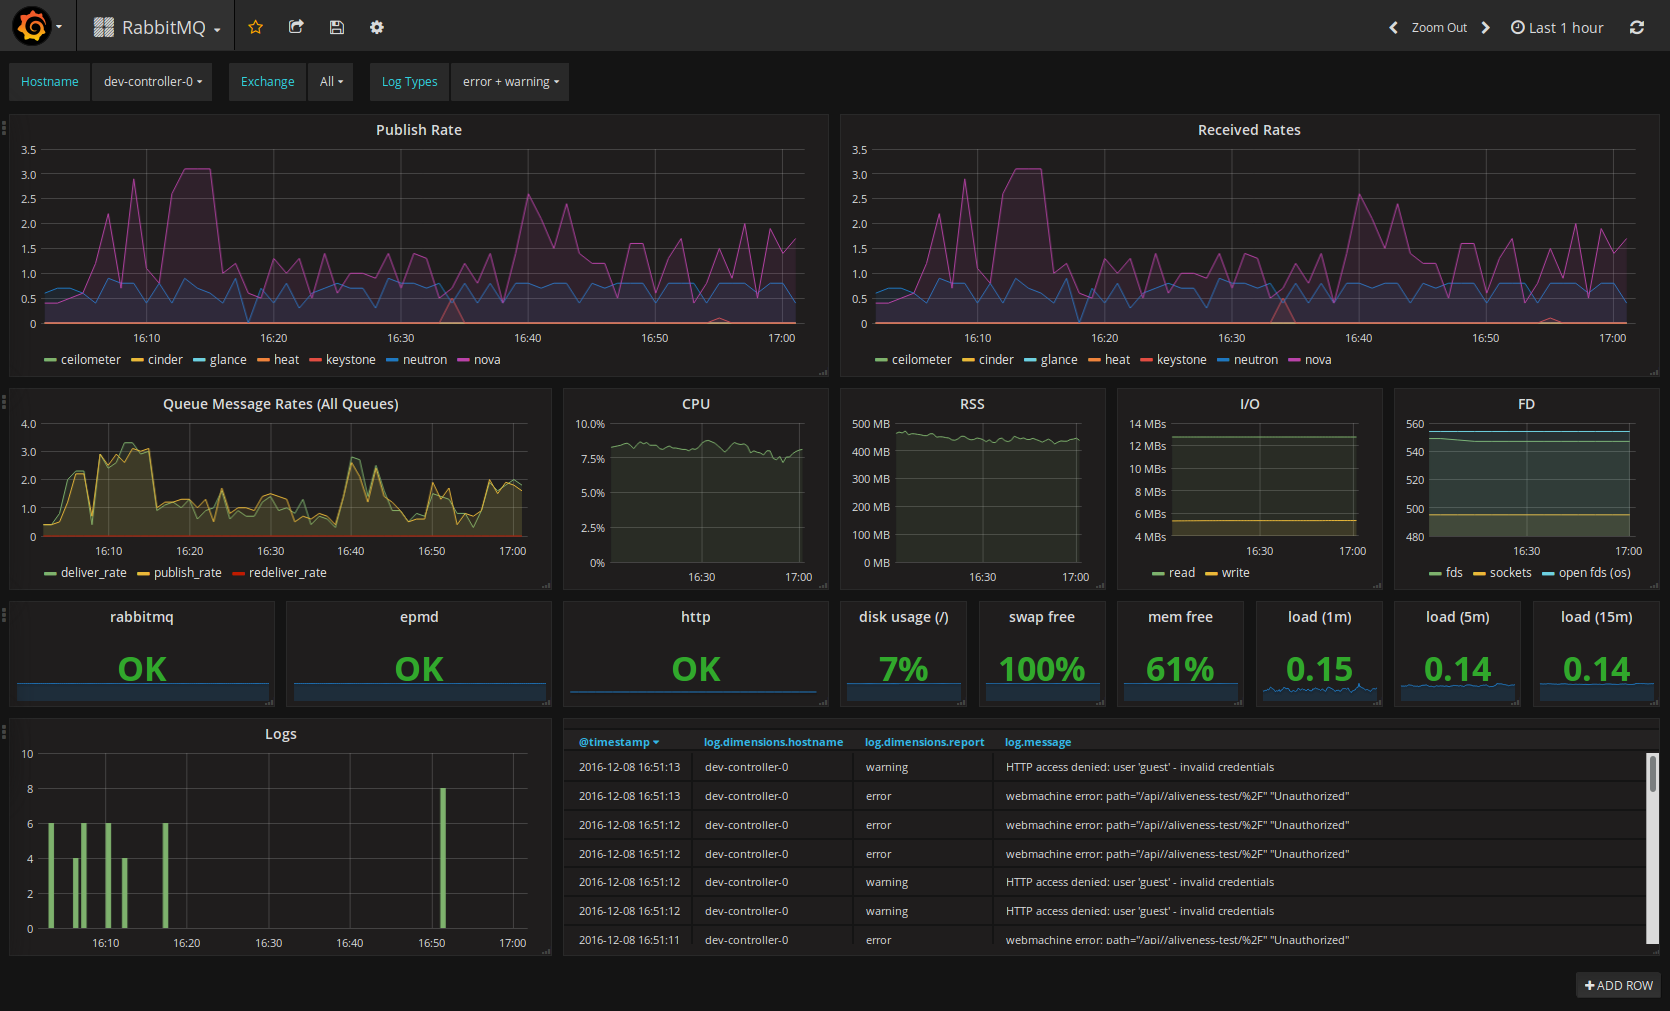 A Grafana dashboard displaying telemetry and log messages for RabbitMQ